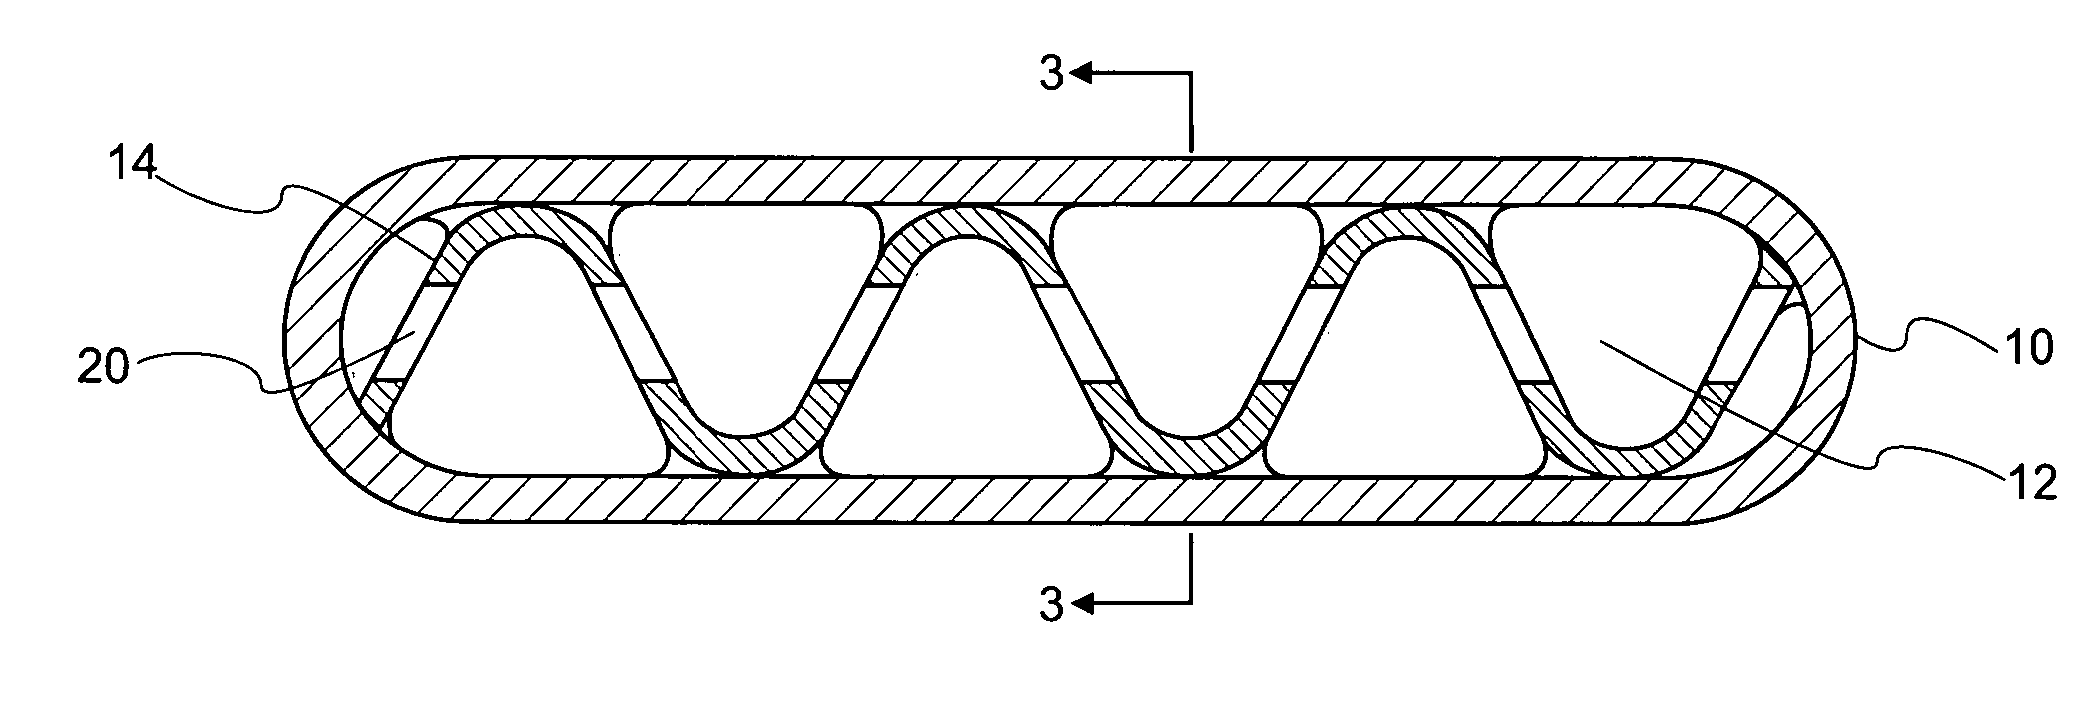 Interconnected microchannel tube